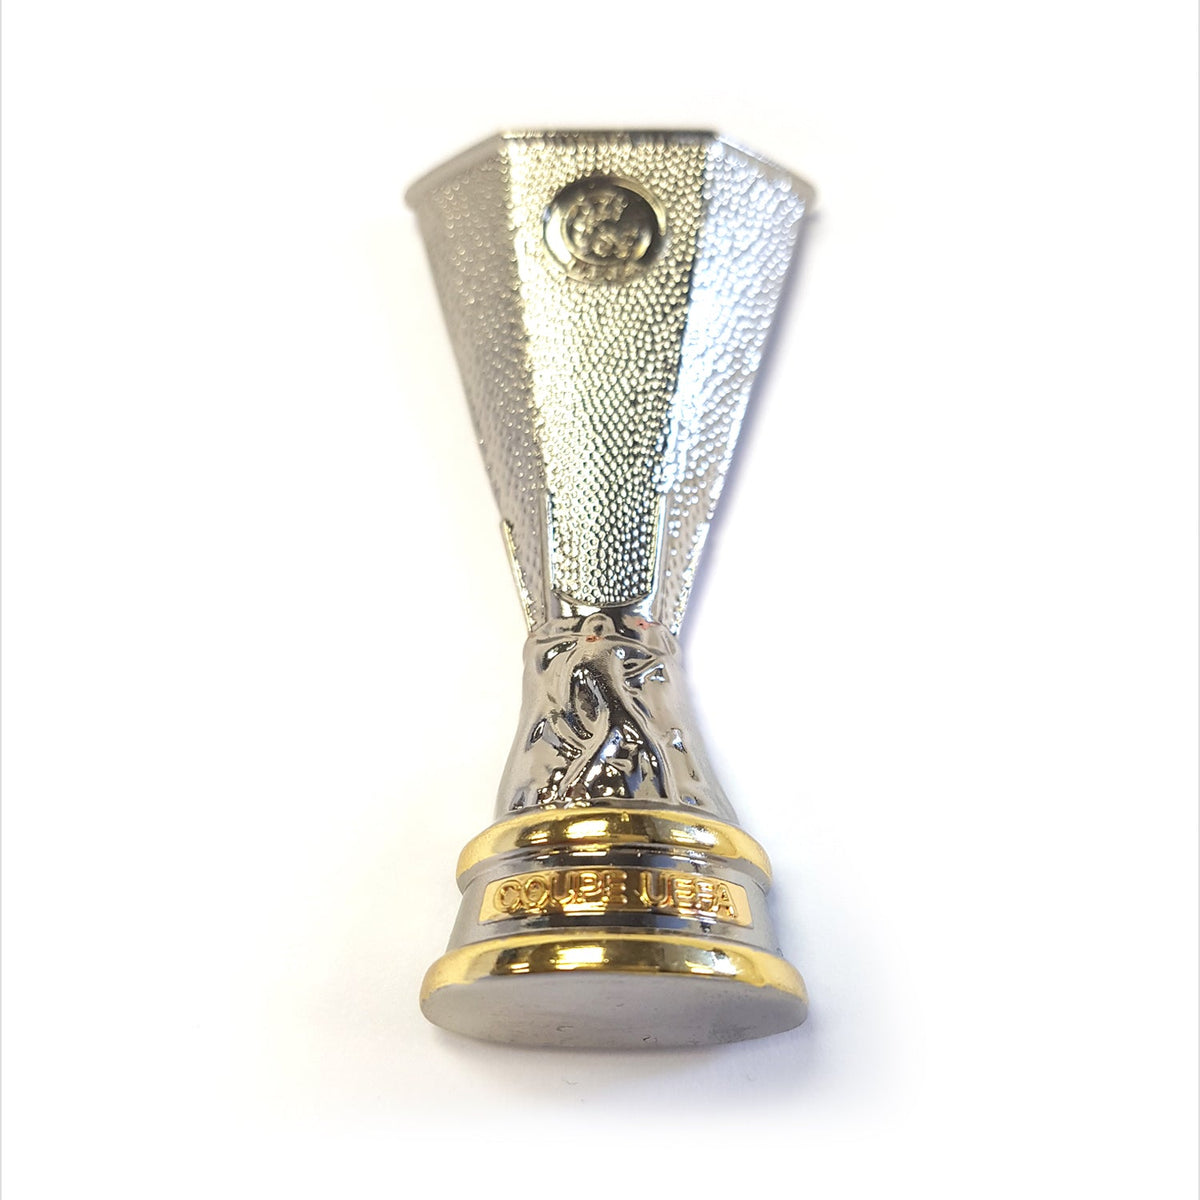 UEFA Europa League Trophy Magnet UEFA Club Competitions Online Store